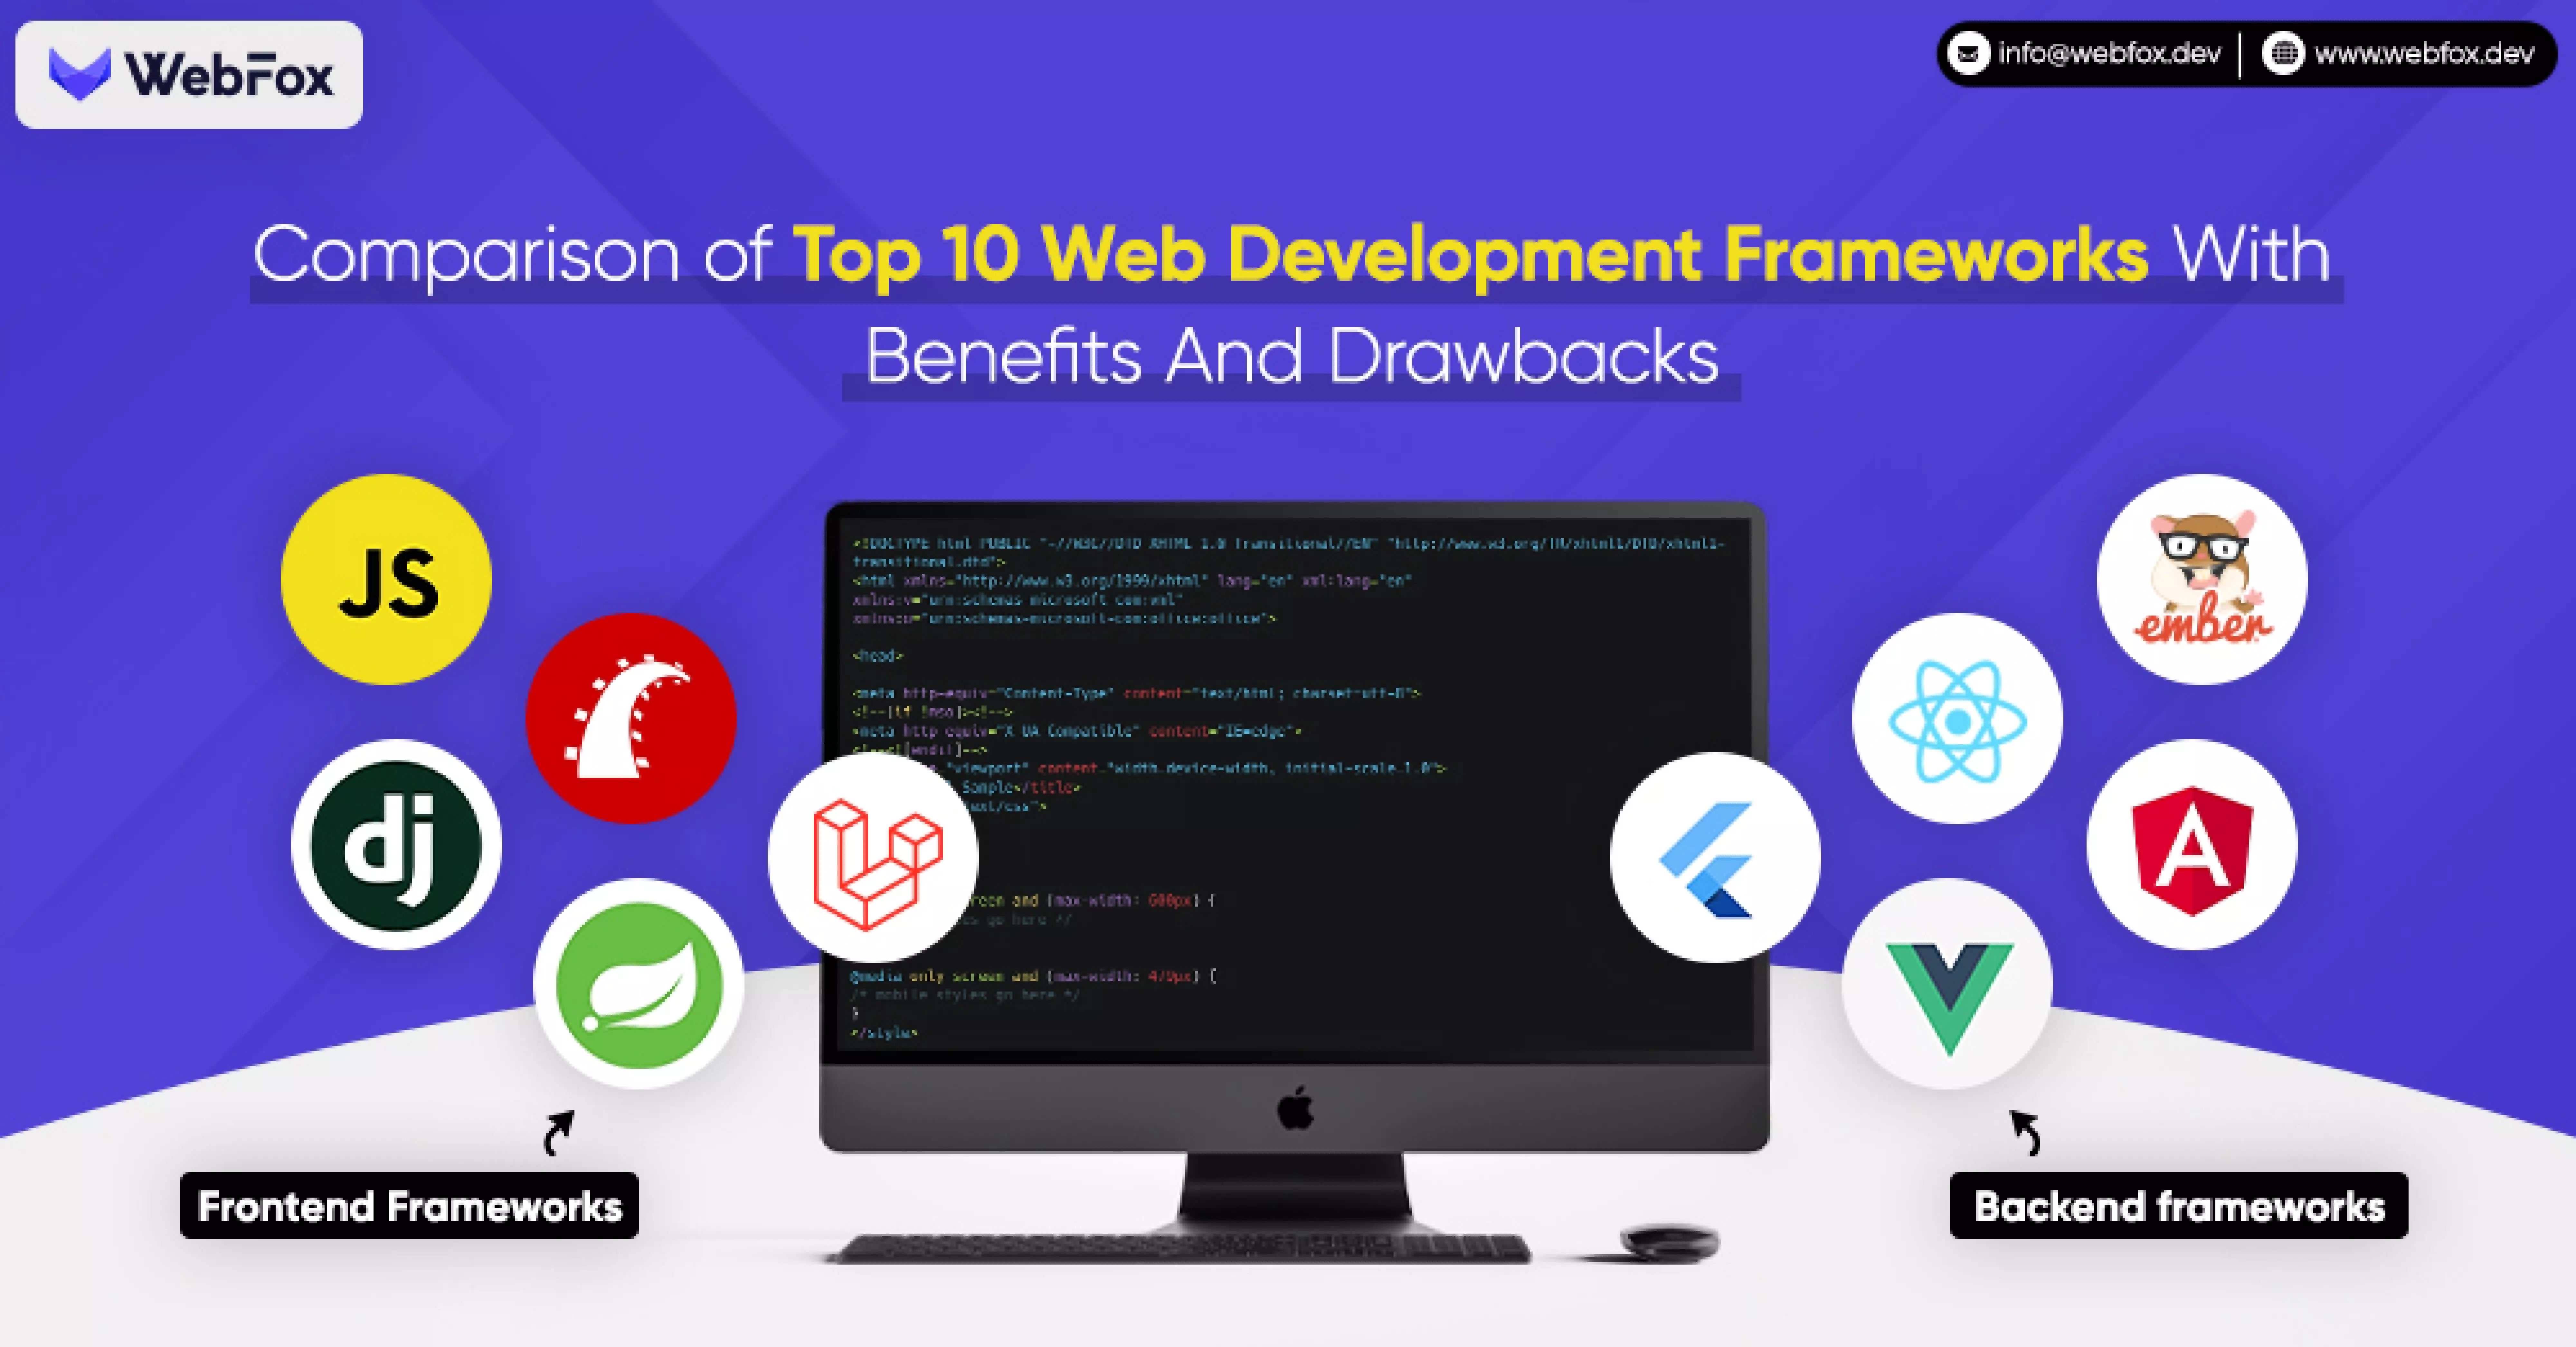 Comparison of Top 10 Web Frameworks With Benefits And Drawbacks